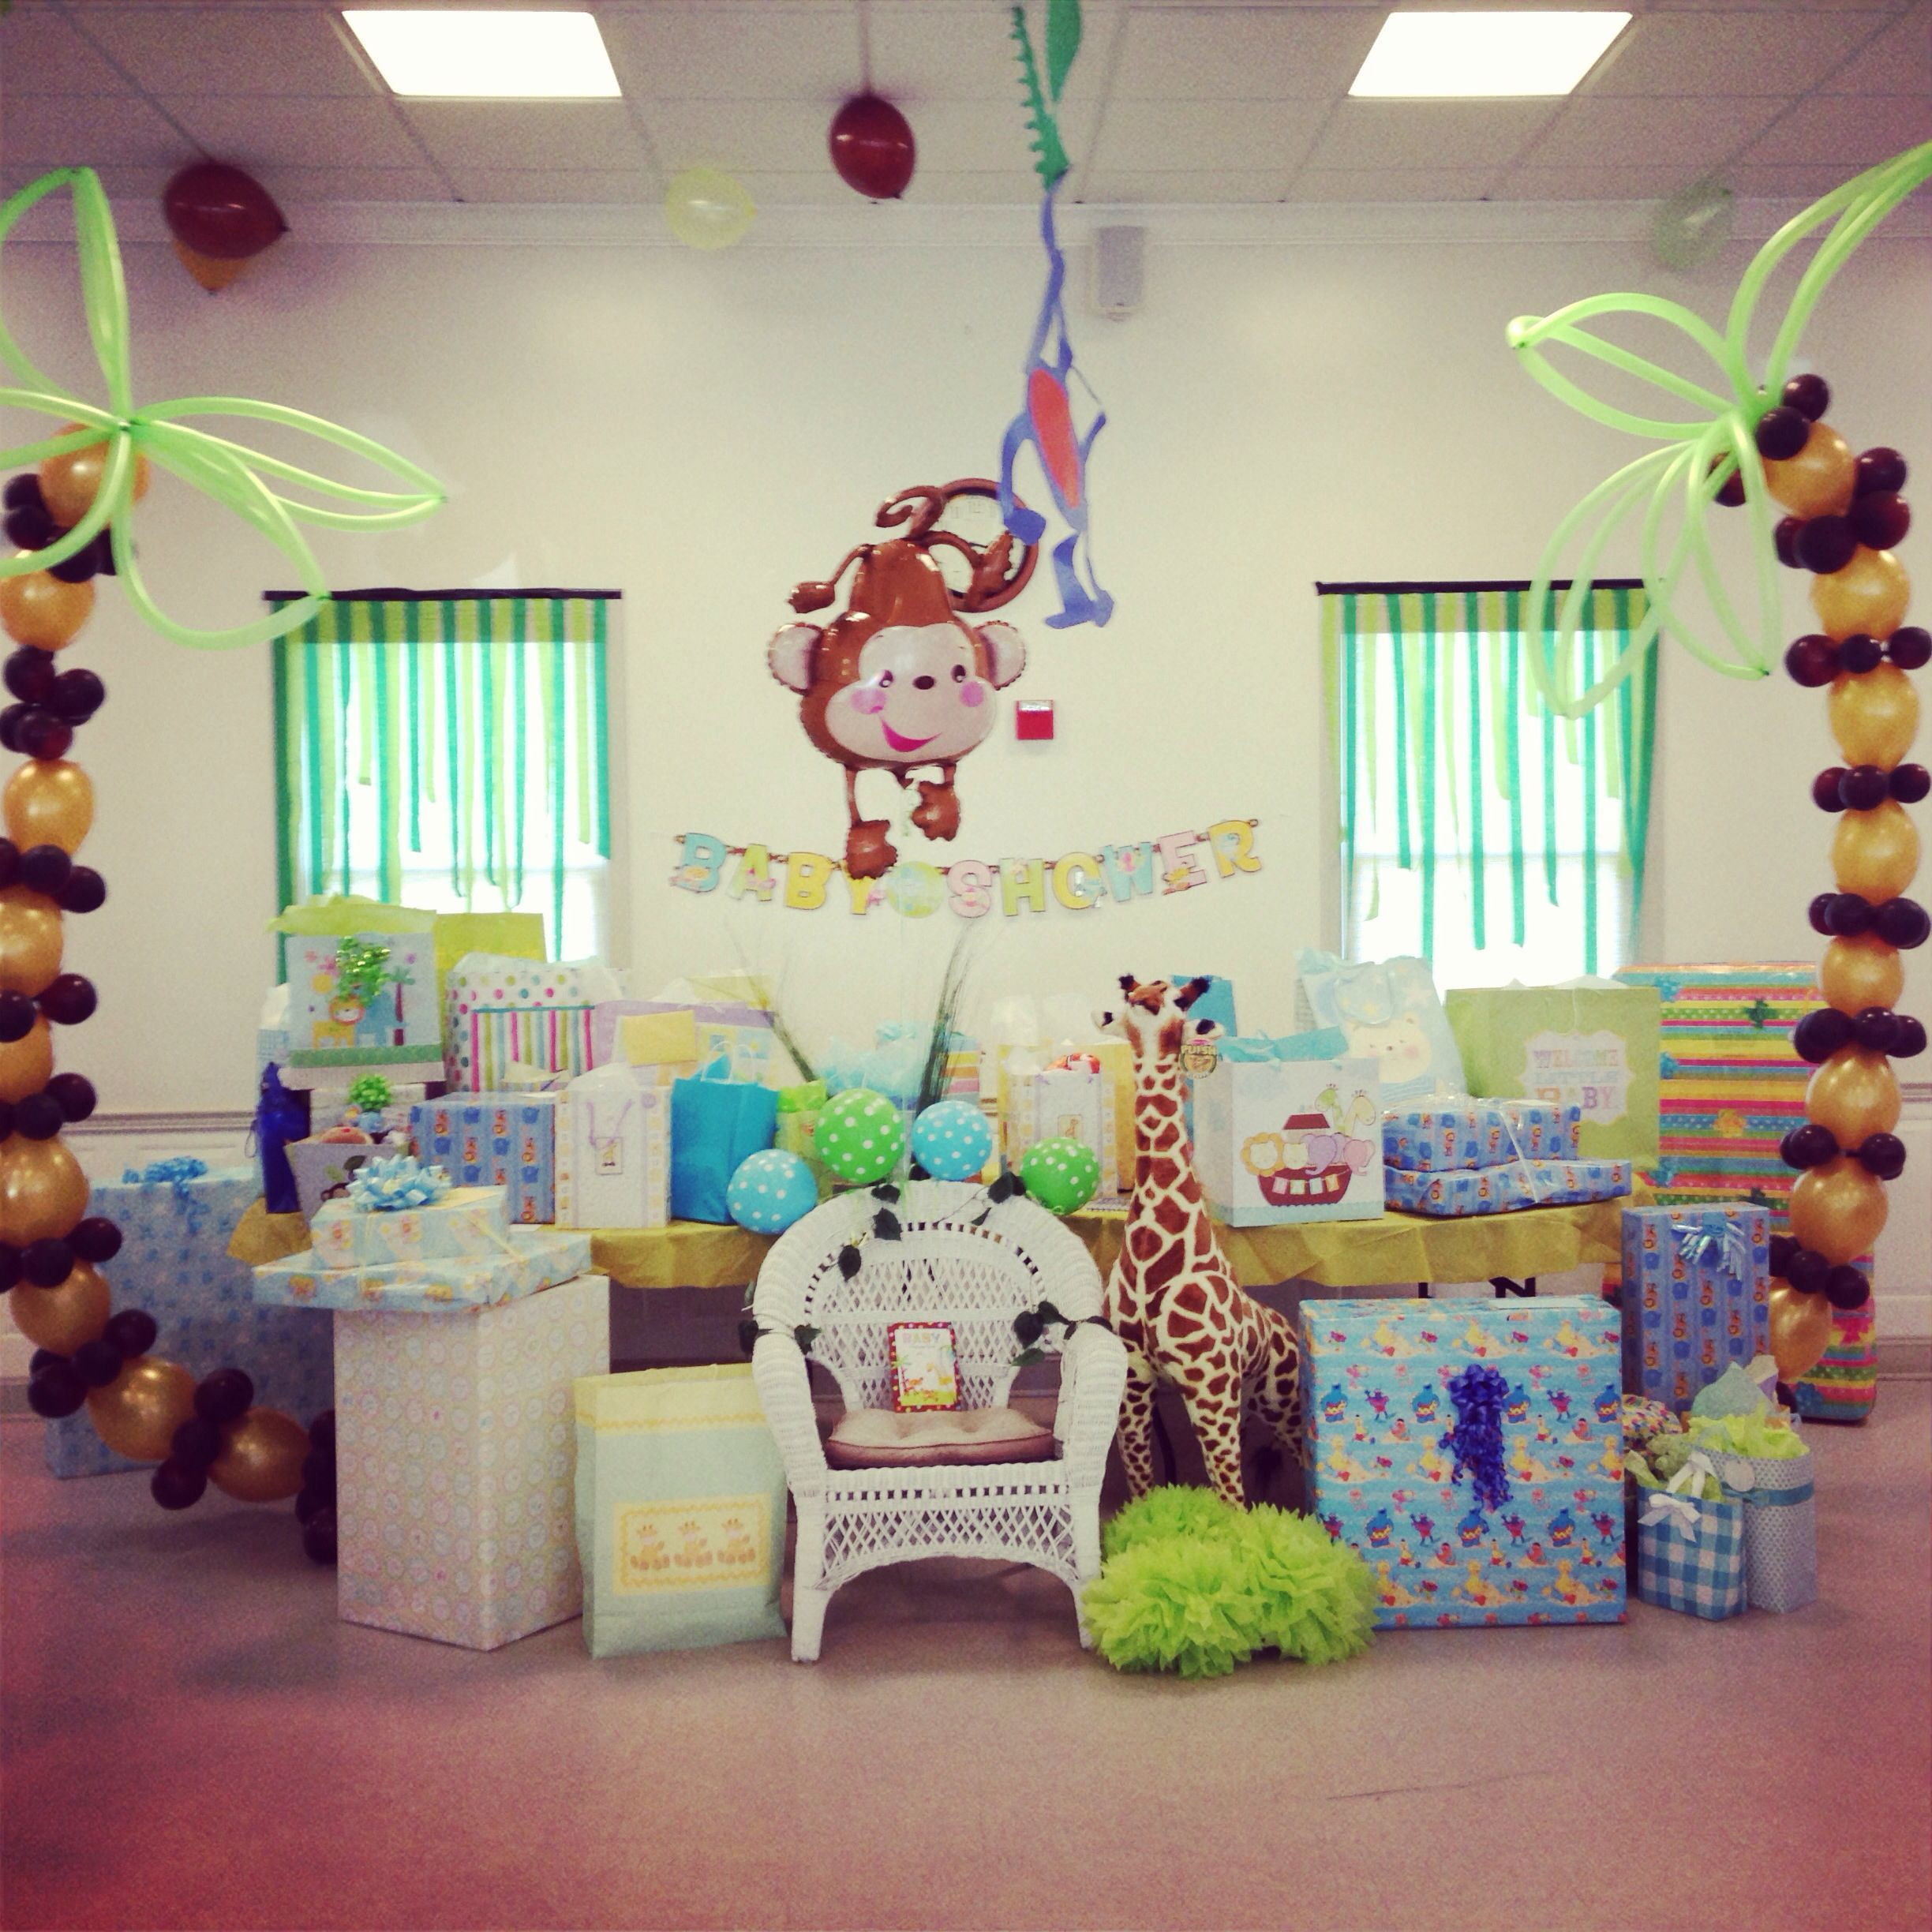 Gift Table Baby Shower Ideas
 Gift table jungle themed baby shower Baby shower